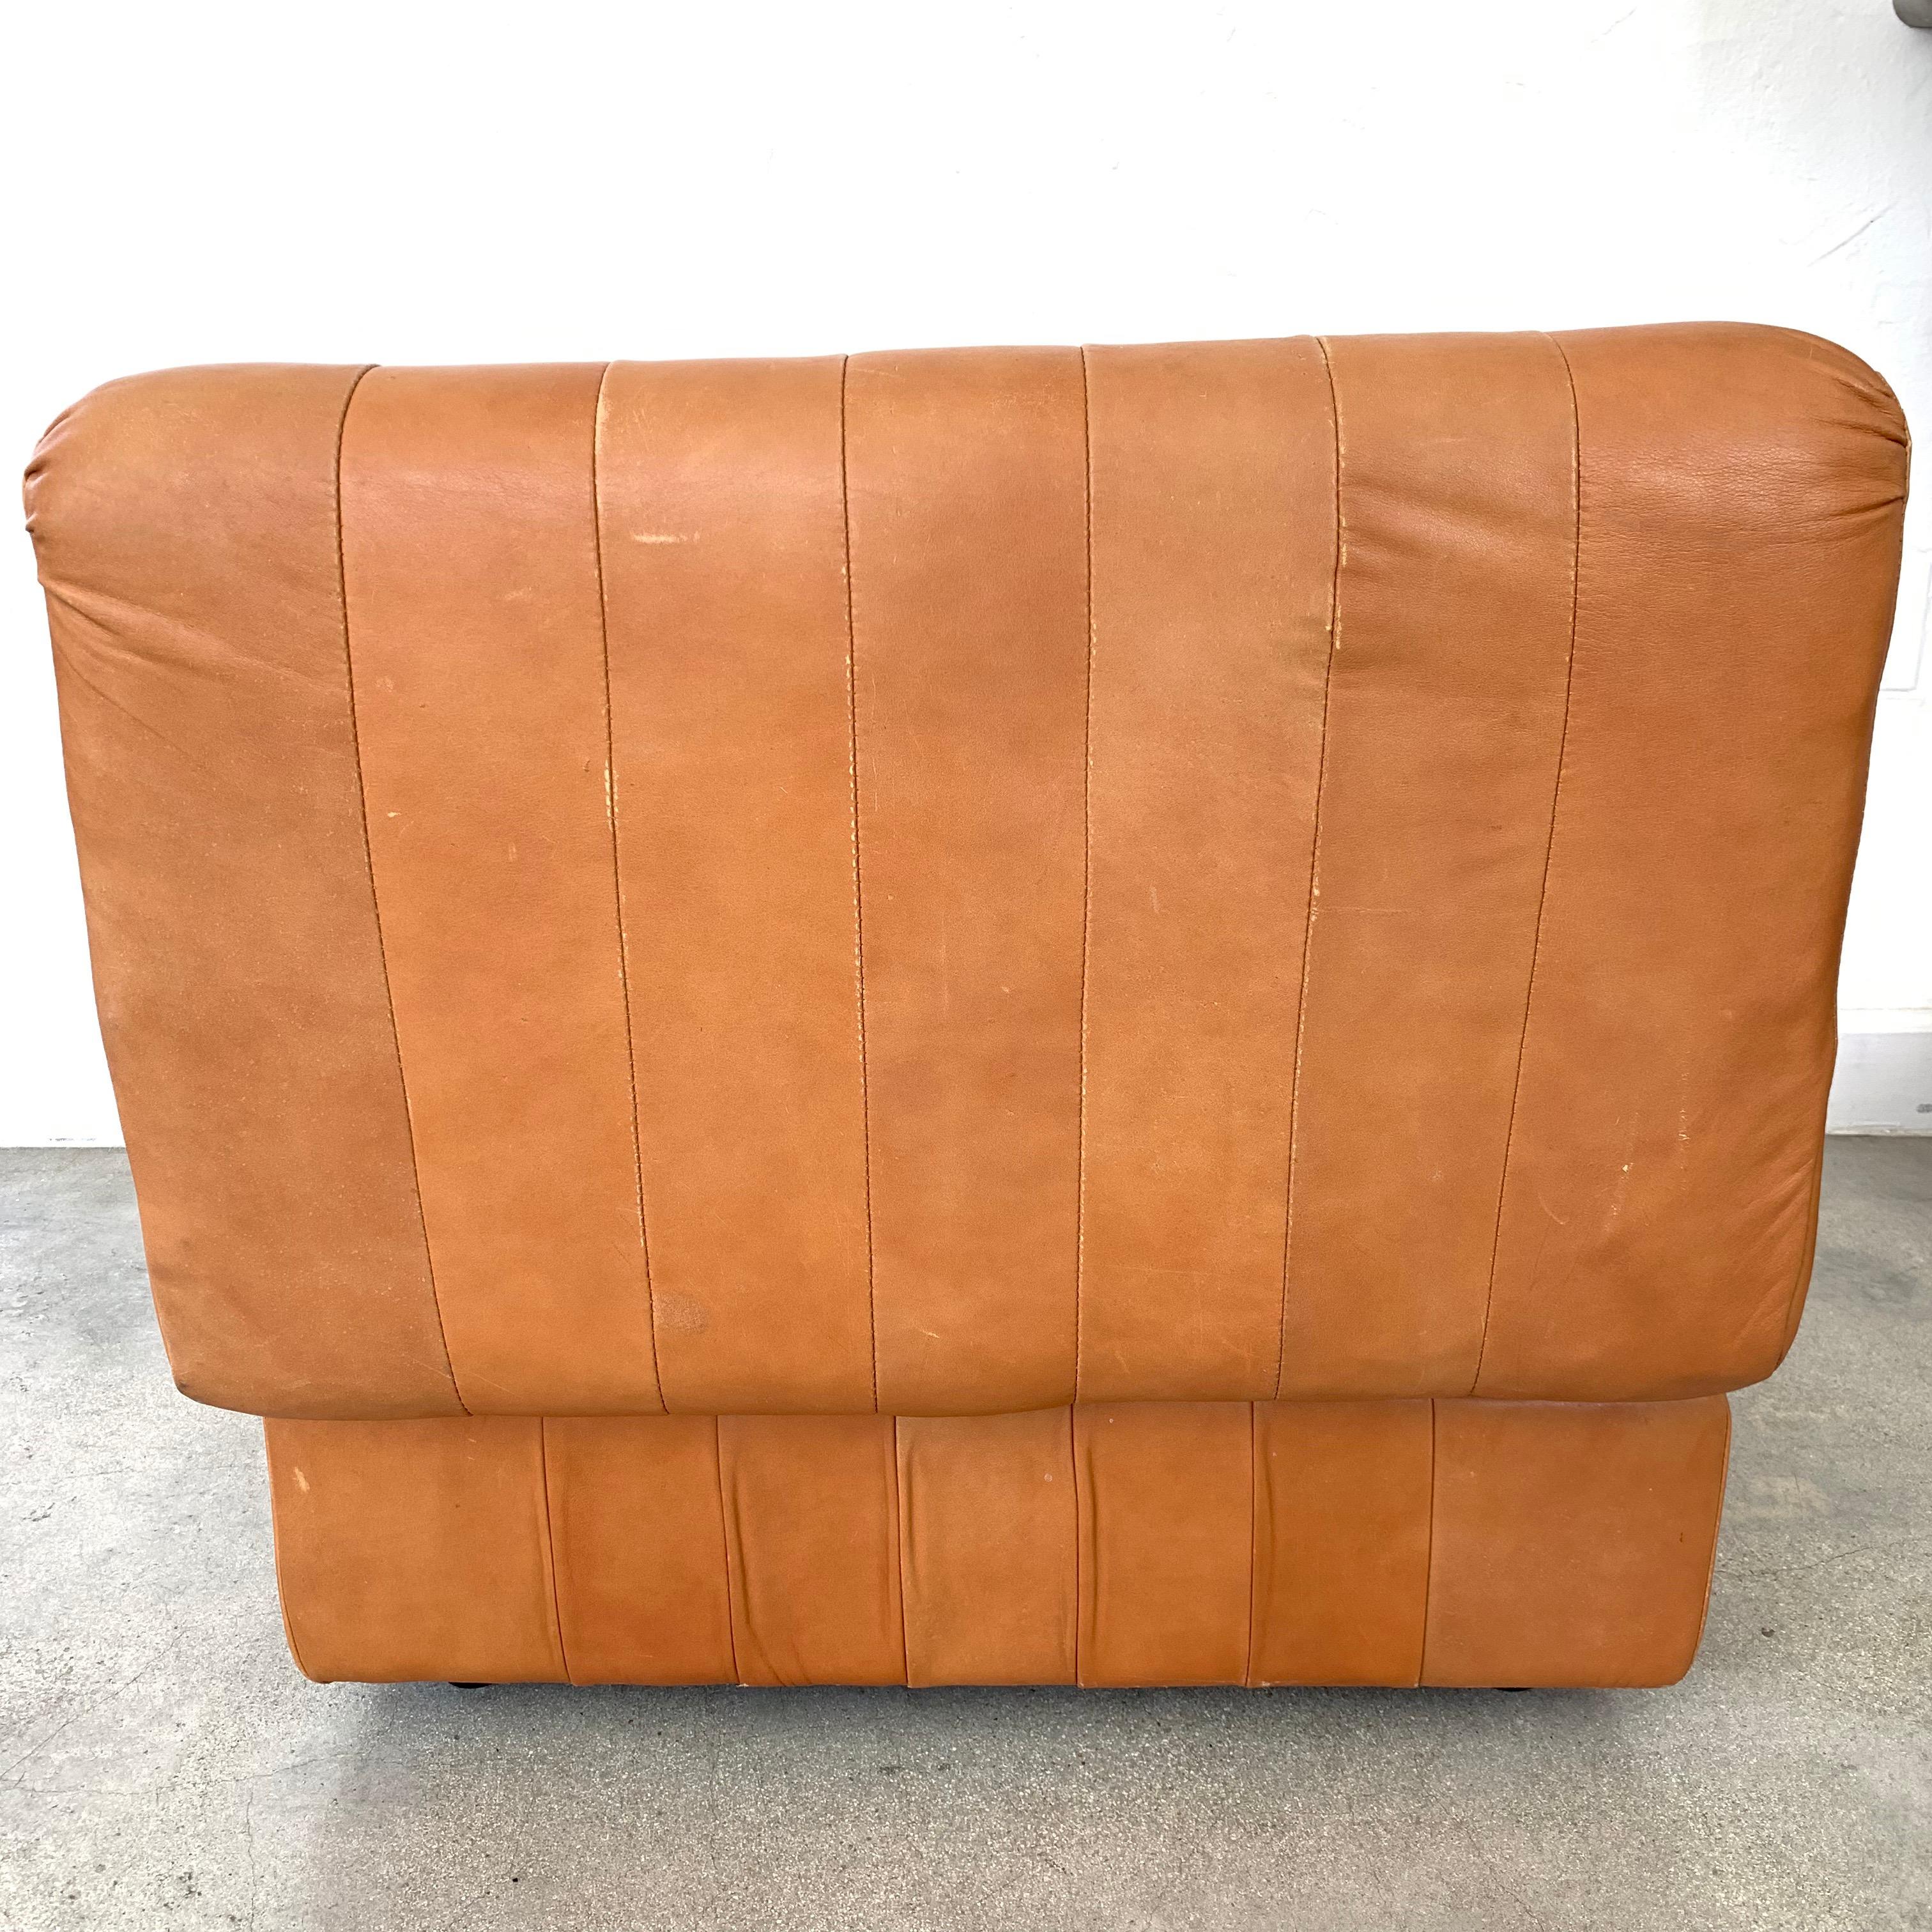 Brazilian Percival Lafer Patchwork Leather Chair or Ottoman